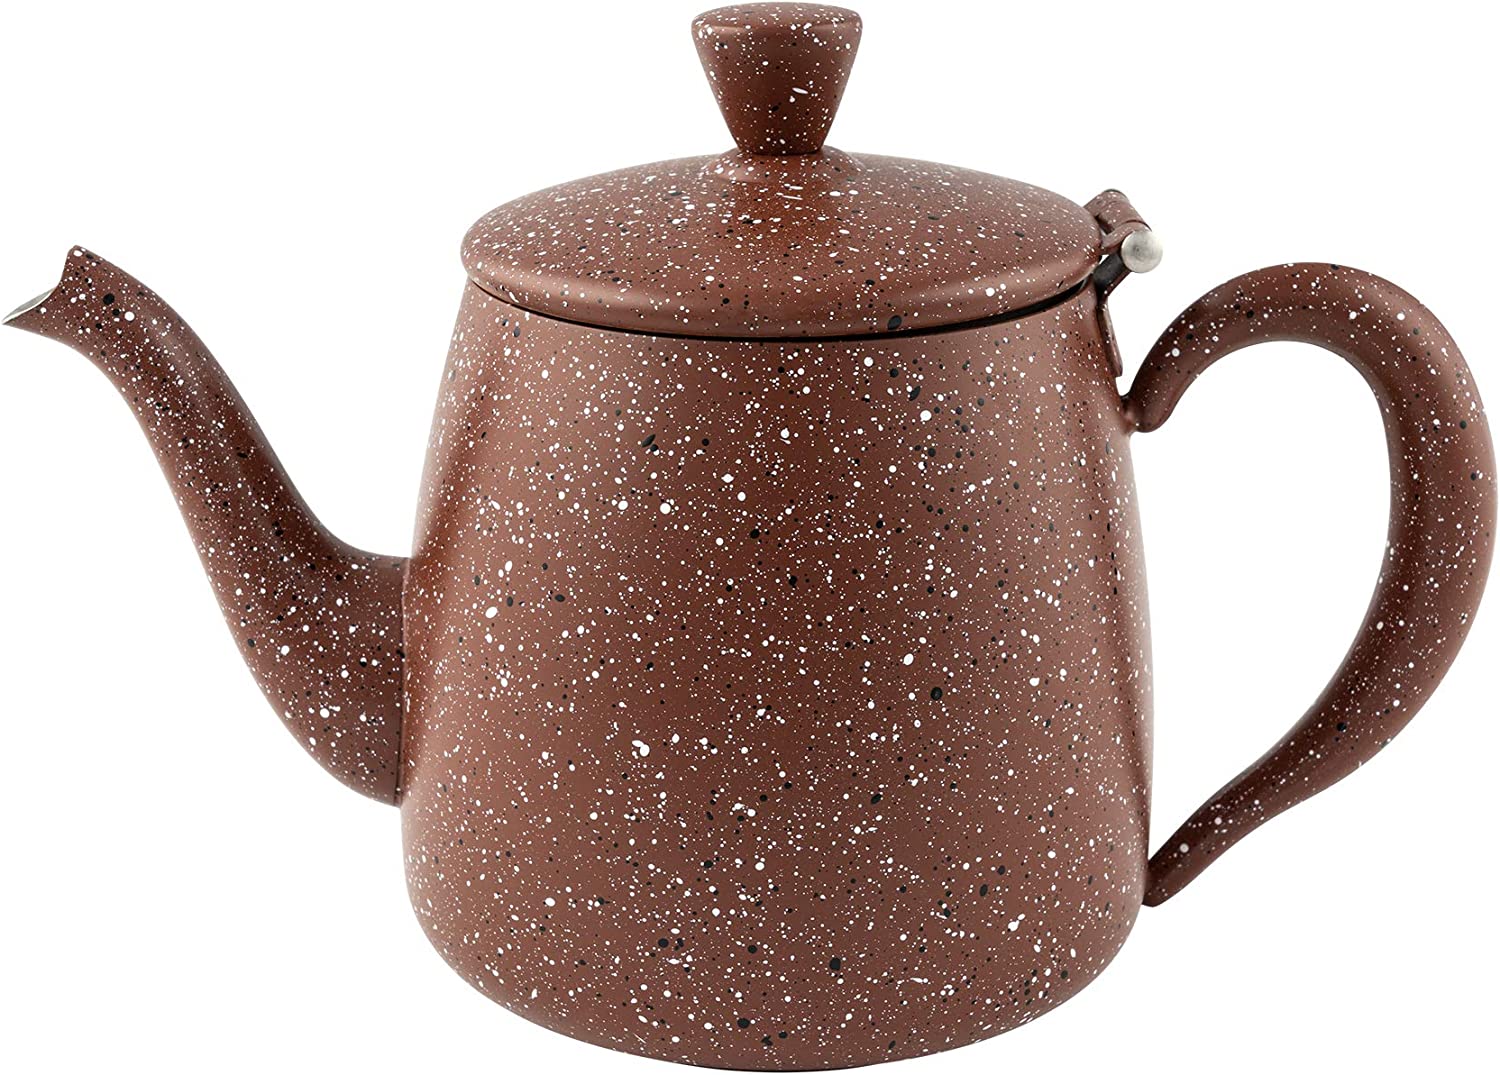 Cafe Ole Café Olé PT-018RG Premium 18oz 0.5L Teapot Made of High Quality Stainless Steel - Red Granite, Drip-Free Pouring, Hollow Handles & Hinged Lid